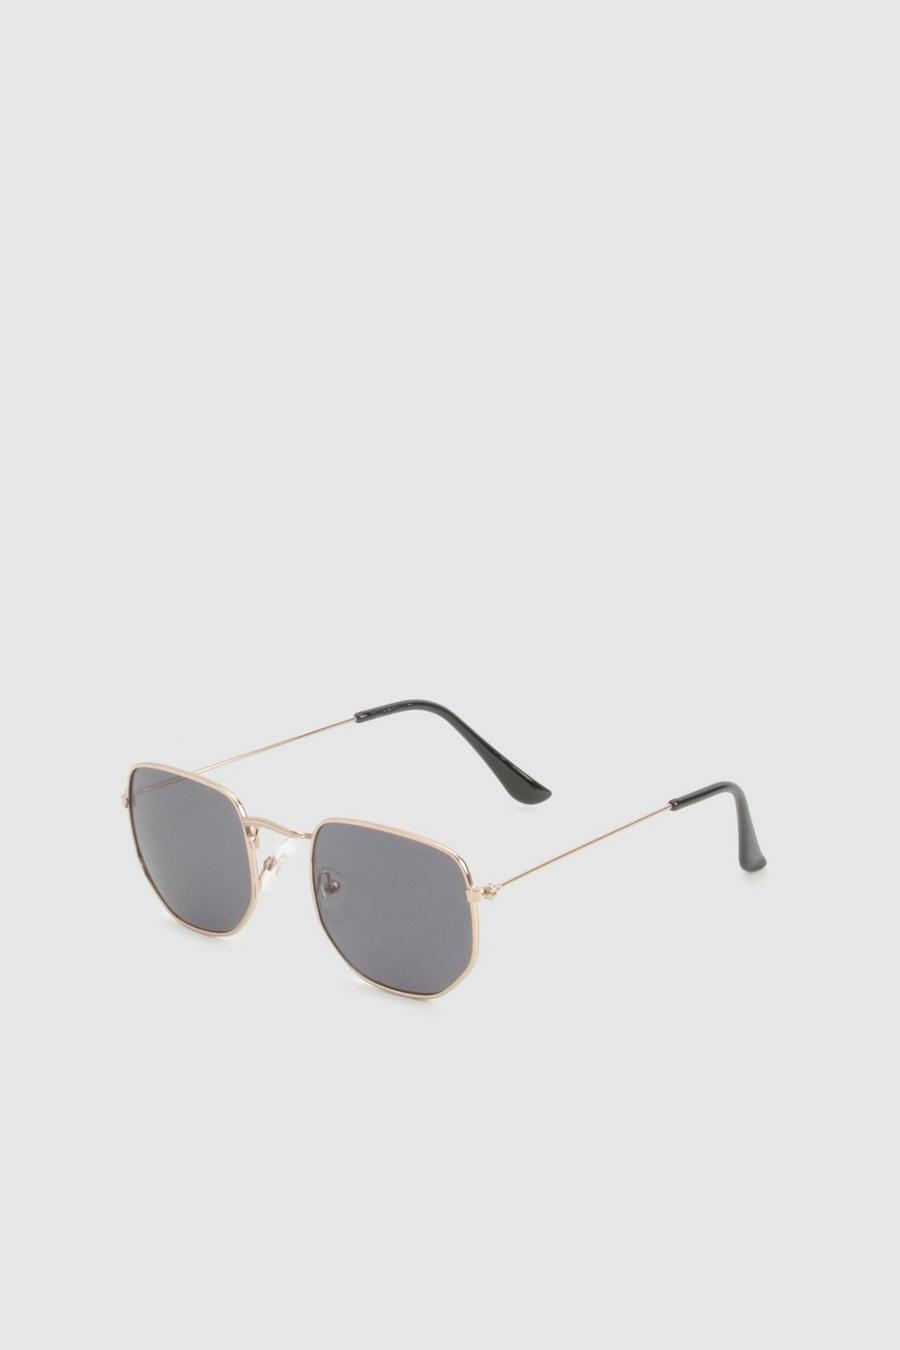 Gold Tinted Metal Frame Round Sunglasses